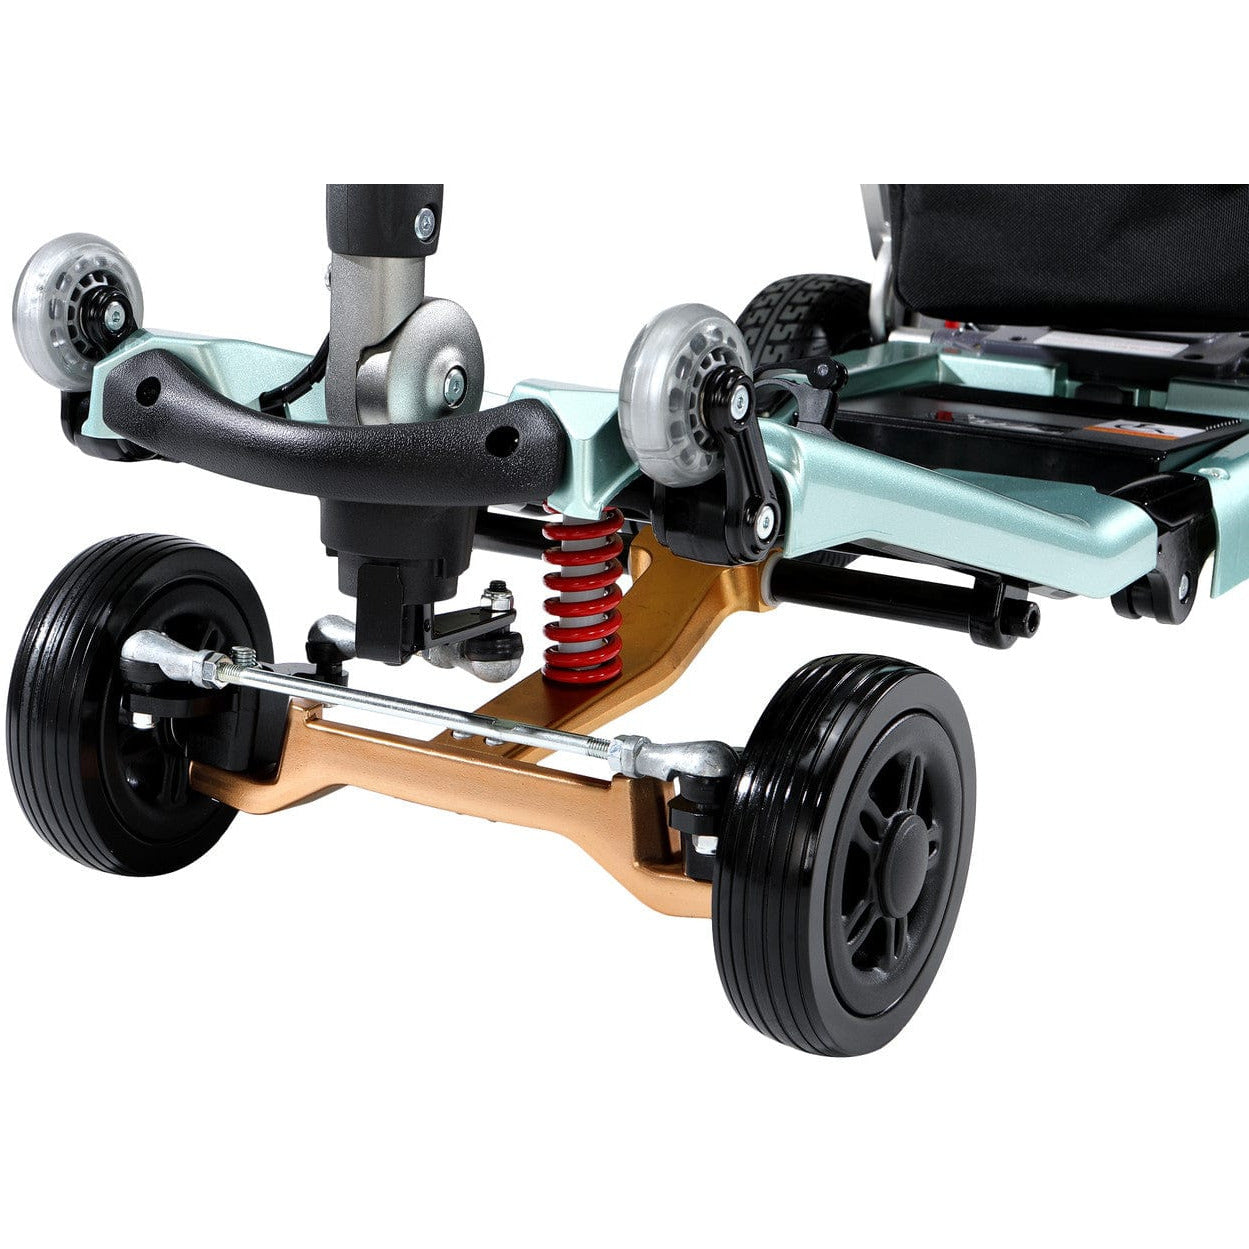 FreeRider Luggie Super Plus 4 Foldable Mobility Scooter with Shock Suspension Mobility Scooters FreeRider USA   